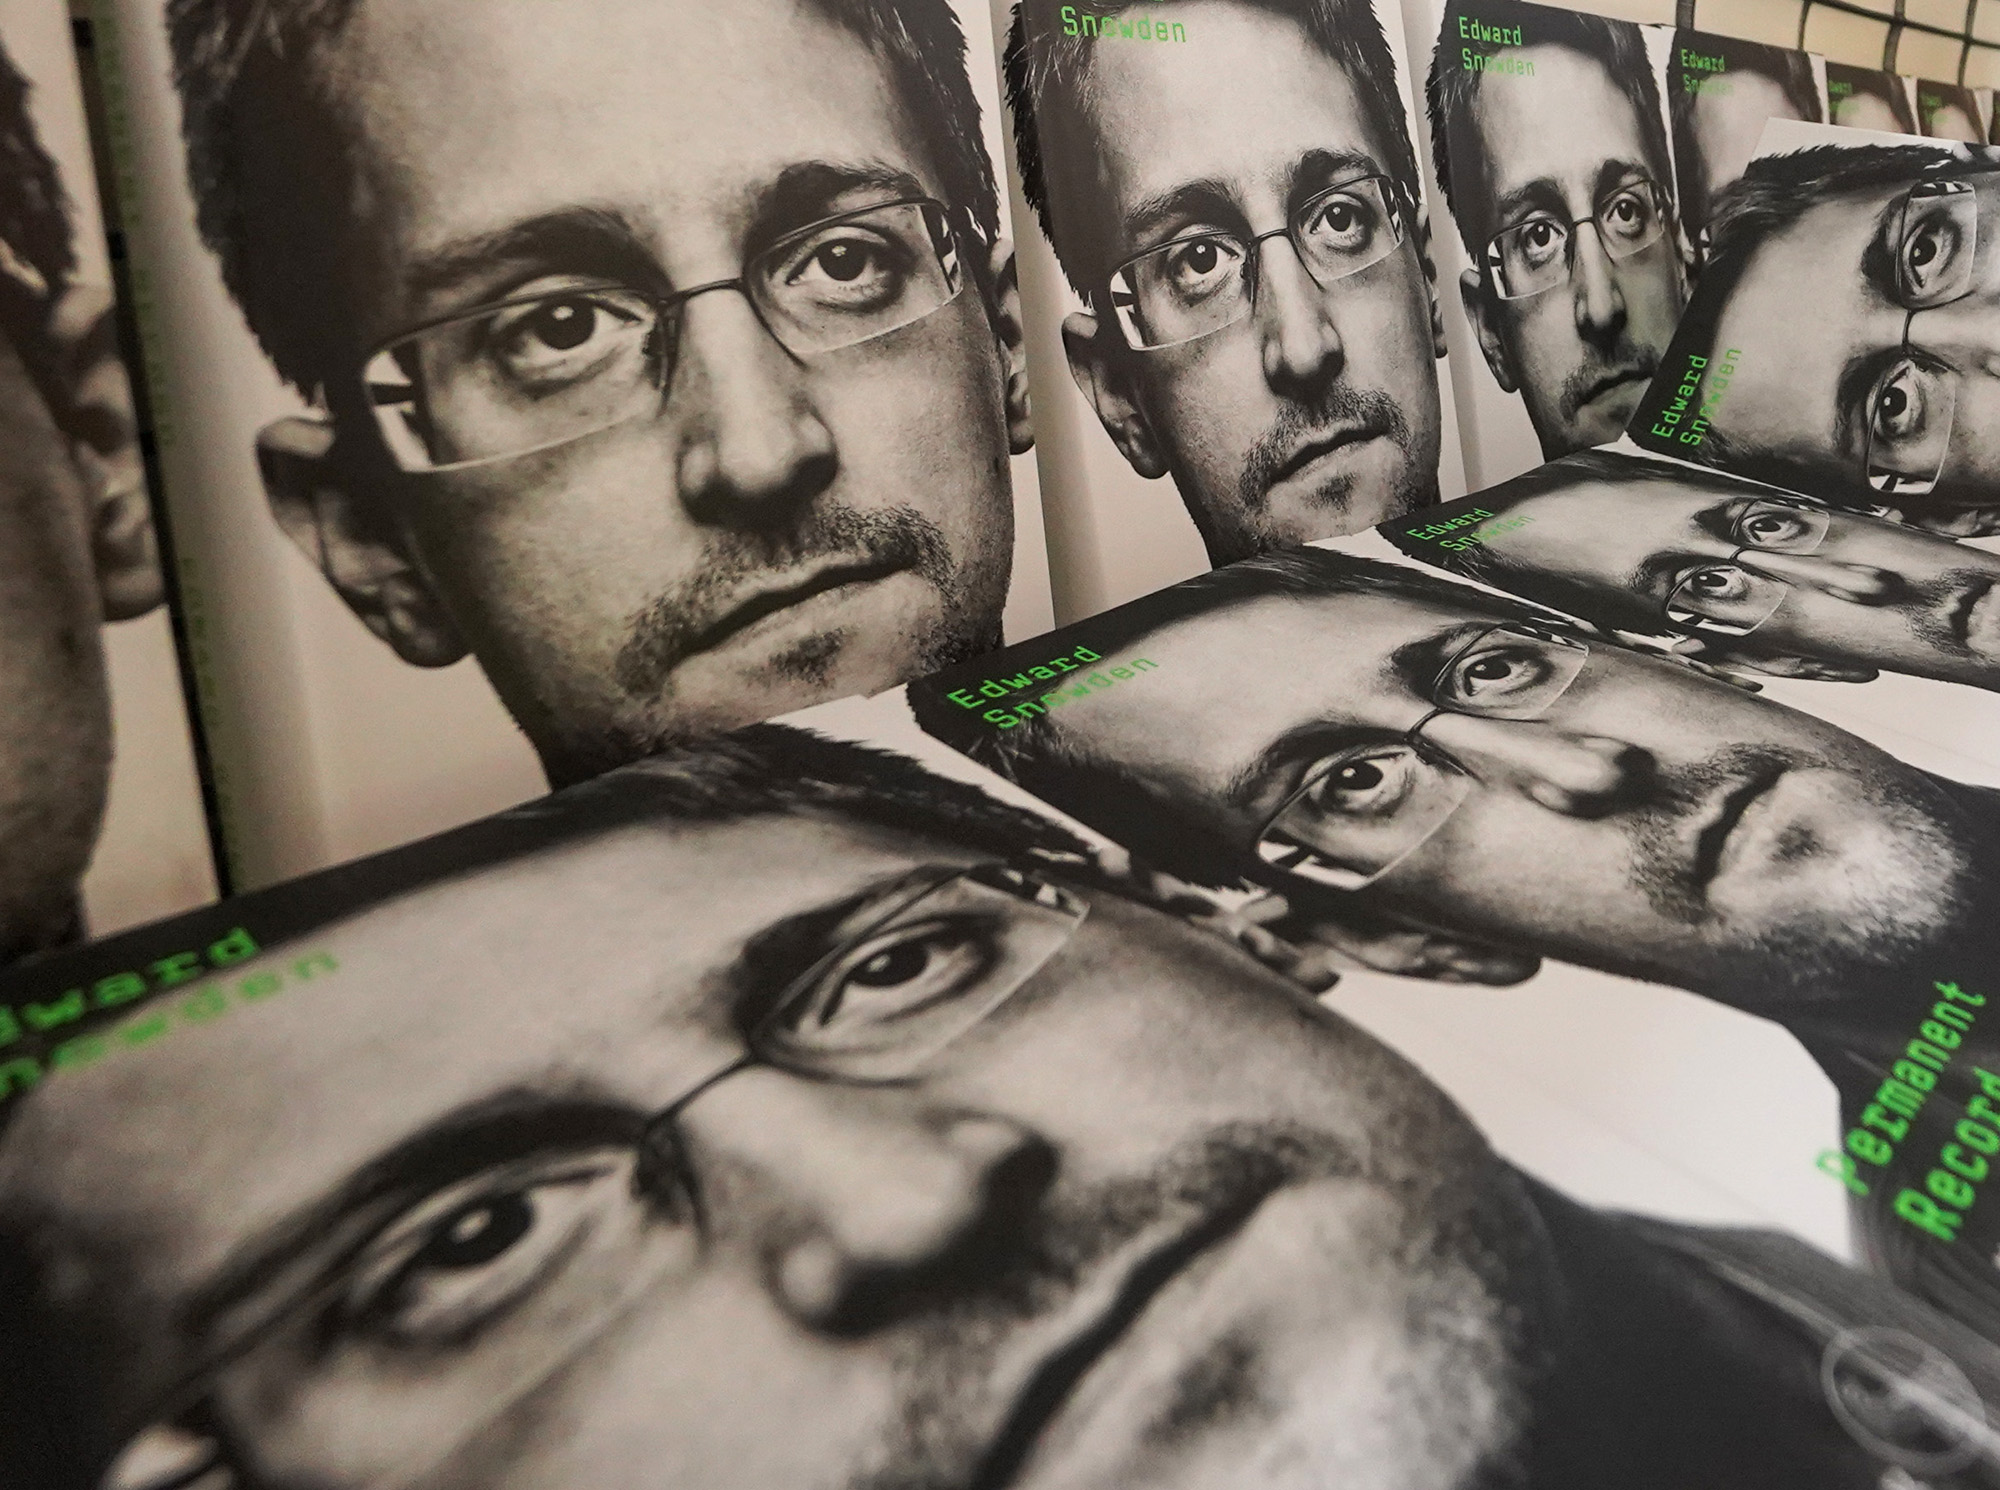 Hack Russia they said No one will care they said - Edward Snowden